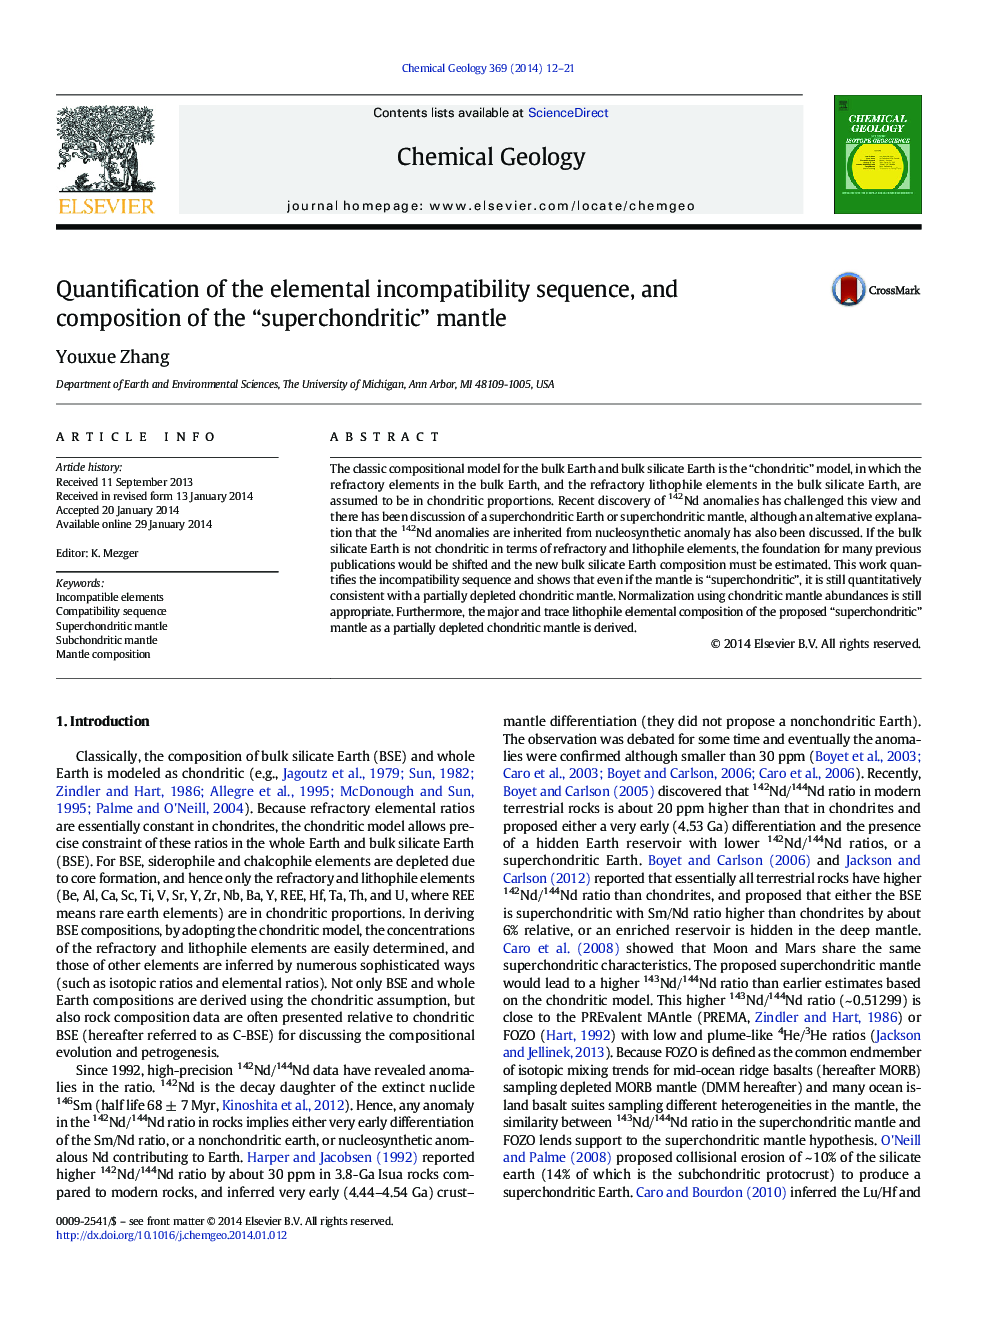 Quantification of the elemental incompatibility sequence, and composition of the “superchondritic” mantle